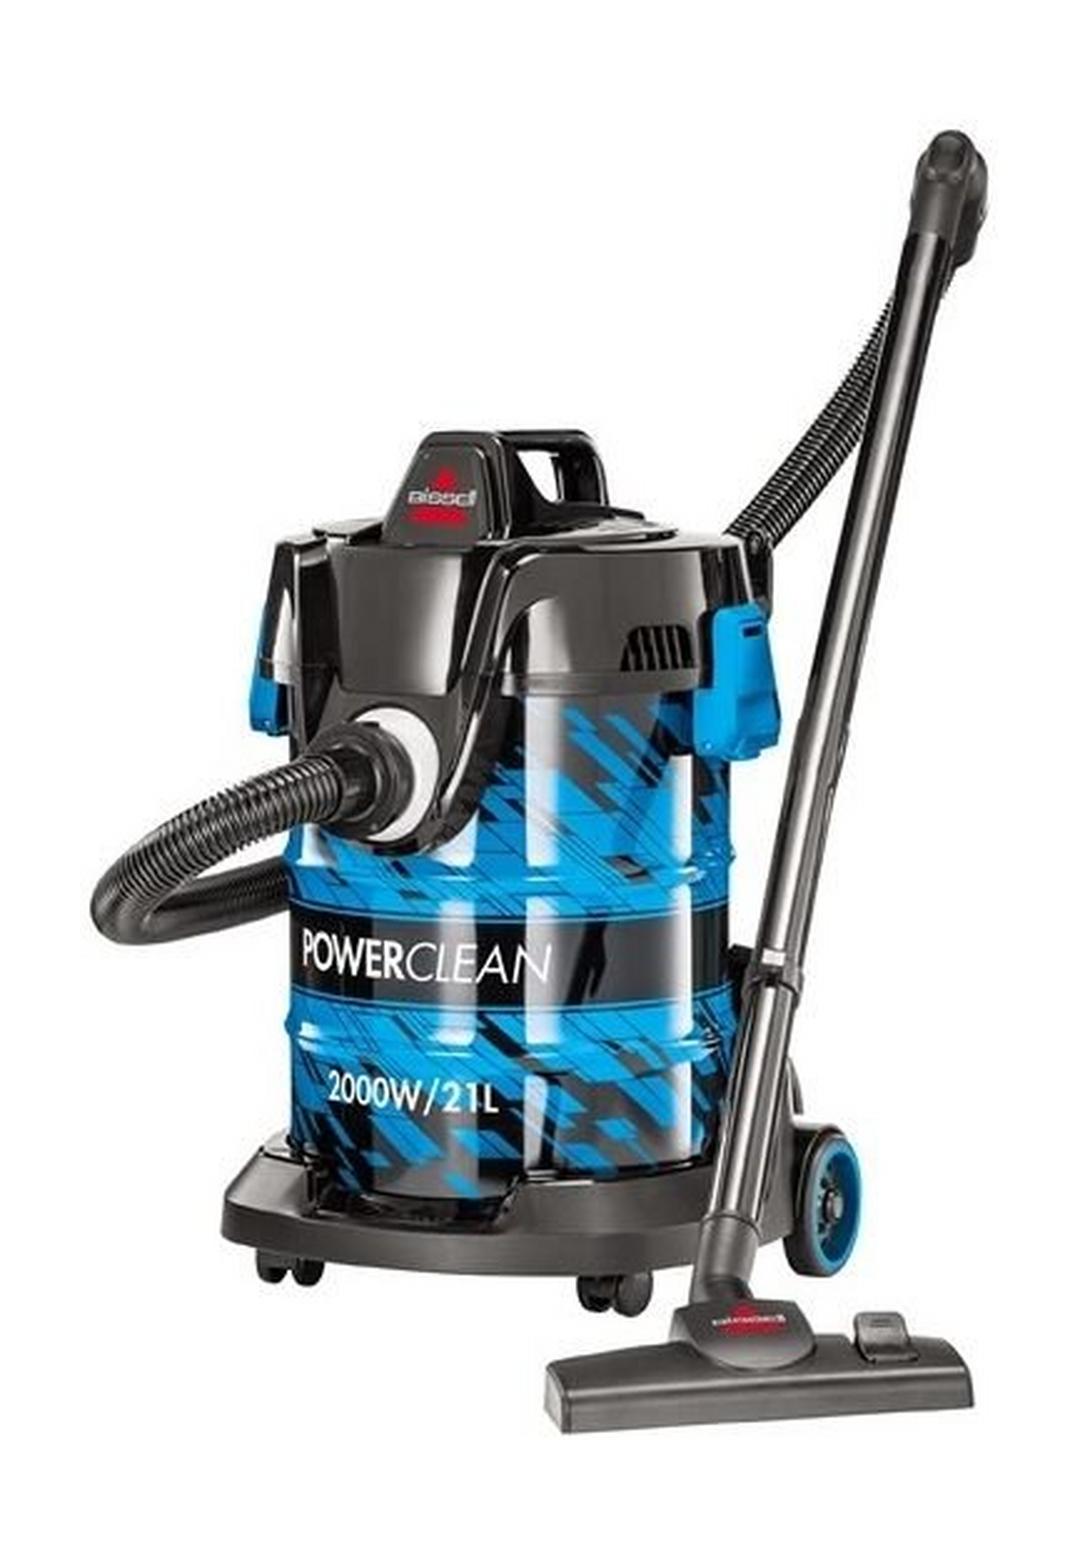 Bissell PowerClean 2000W Drum Vacuum Cleaner (2027E)